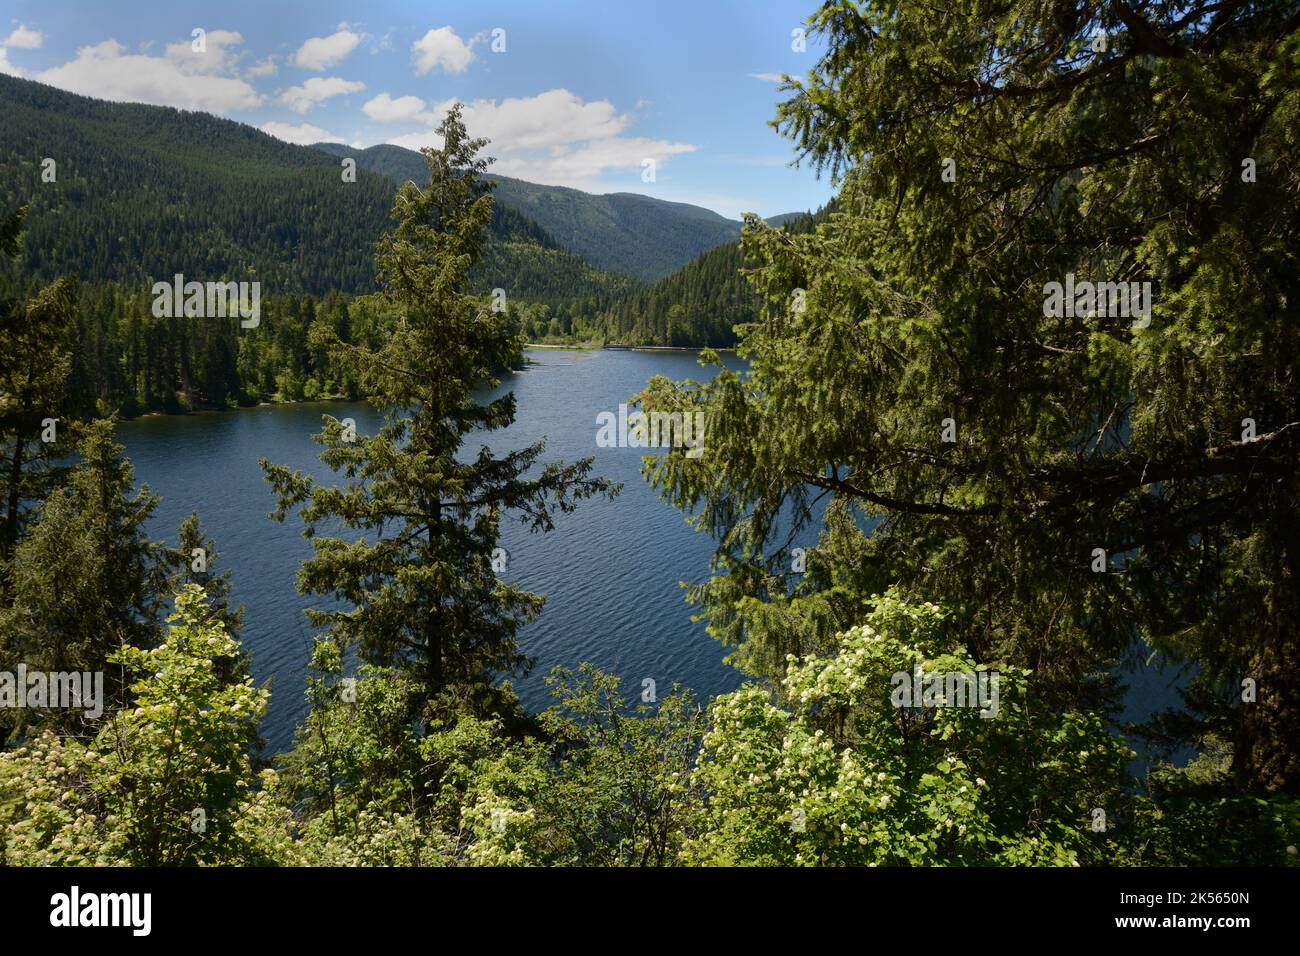 The view of Sullivan Lake, from a hiking trail above the shore, in the Selkirk Mountains of the Colville National Forest, Washington State, USA. Stock Photo